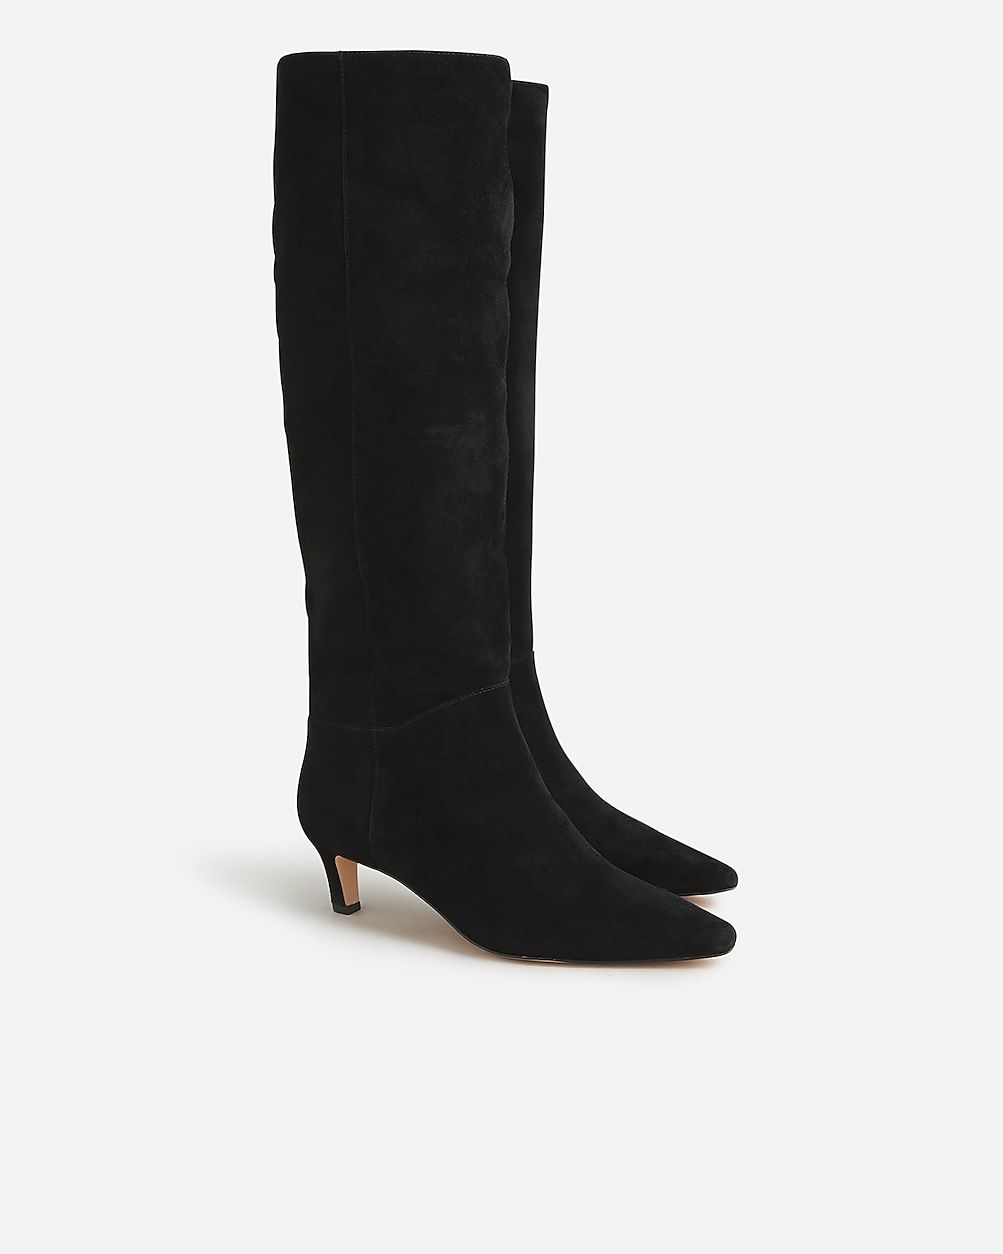 Stevie knee-high boots in suede | J.Crew US